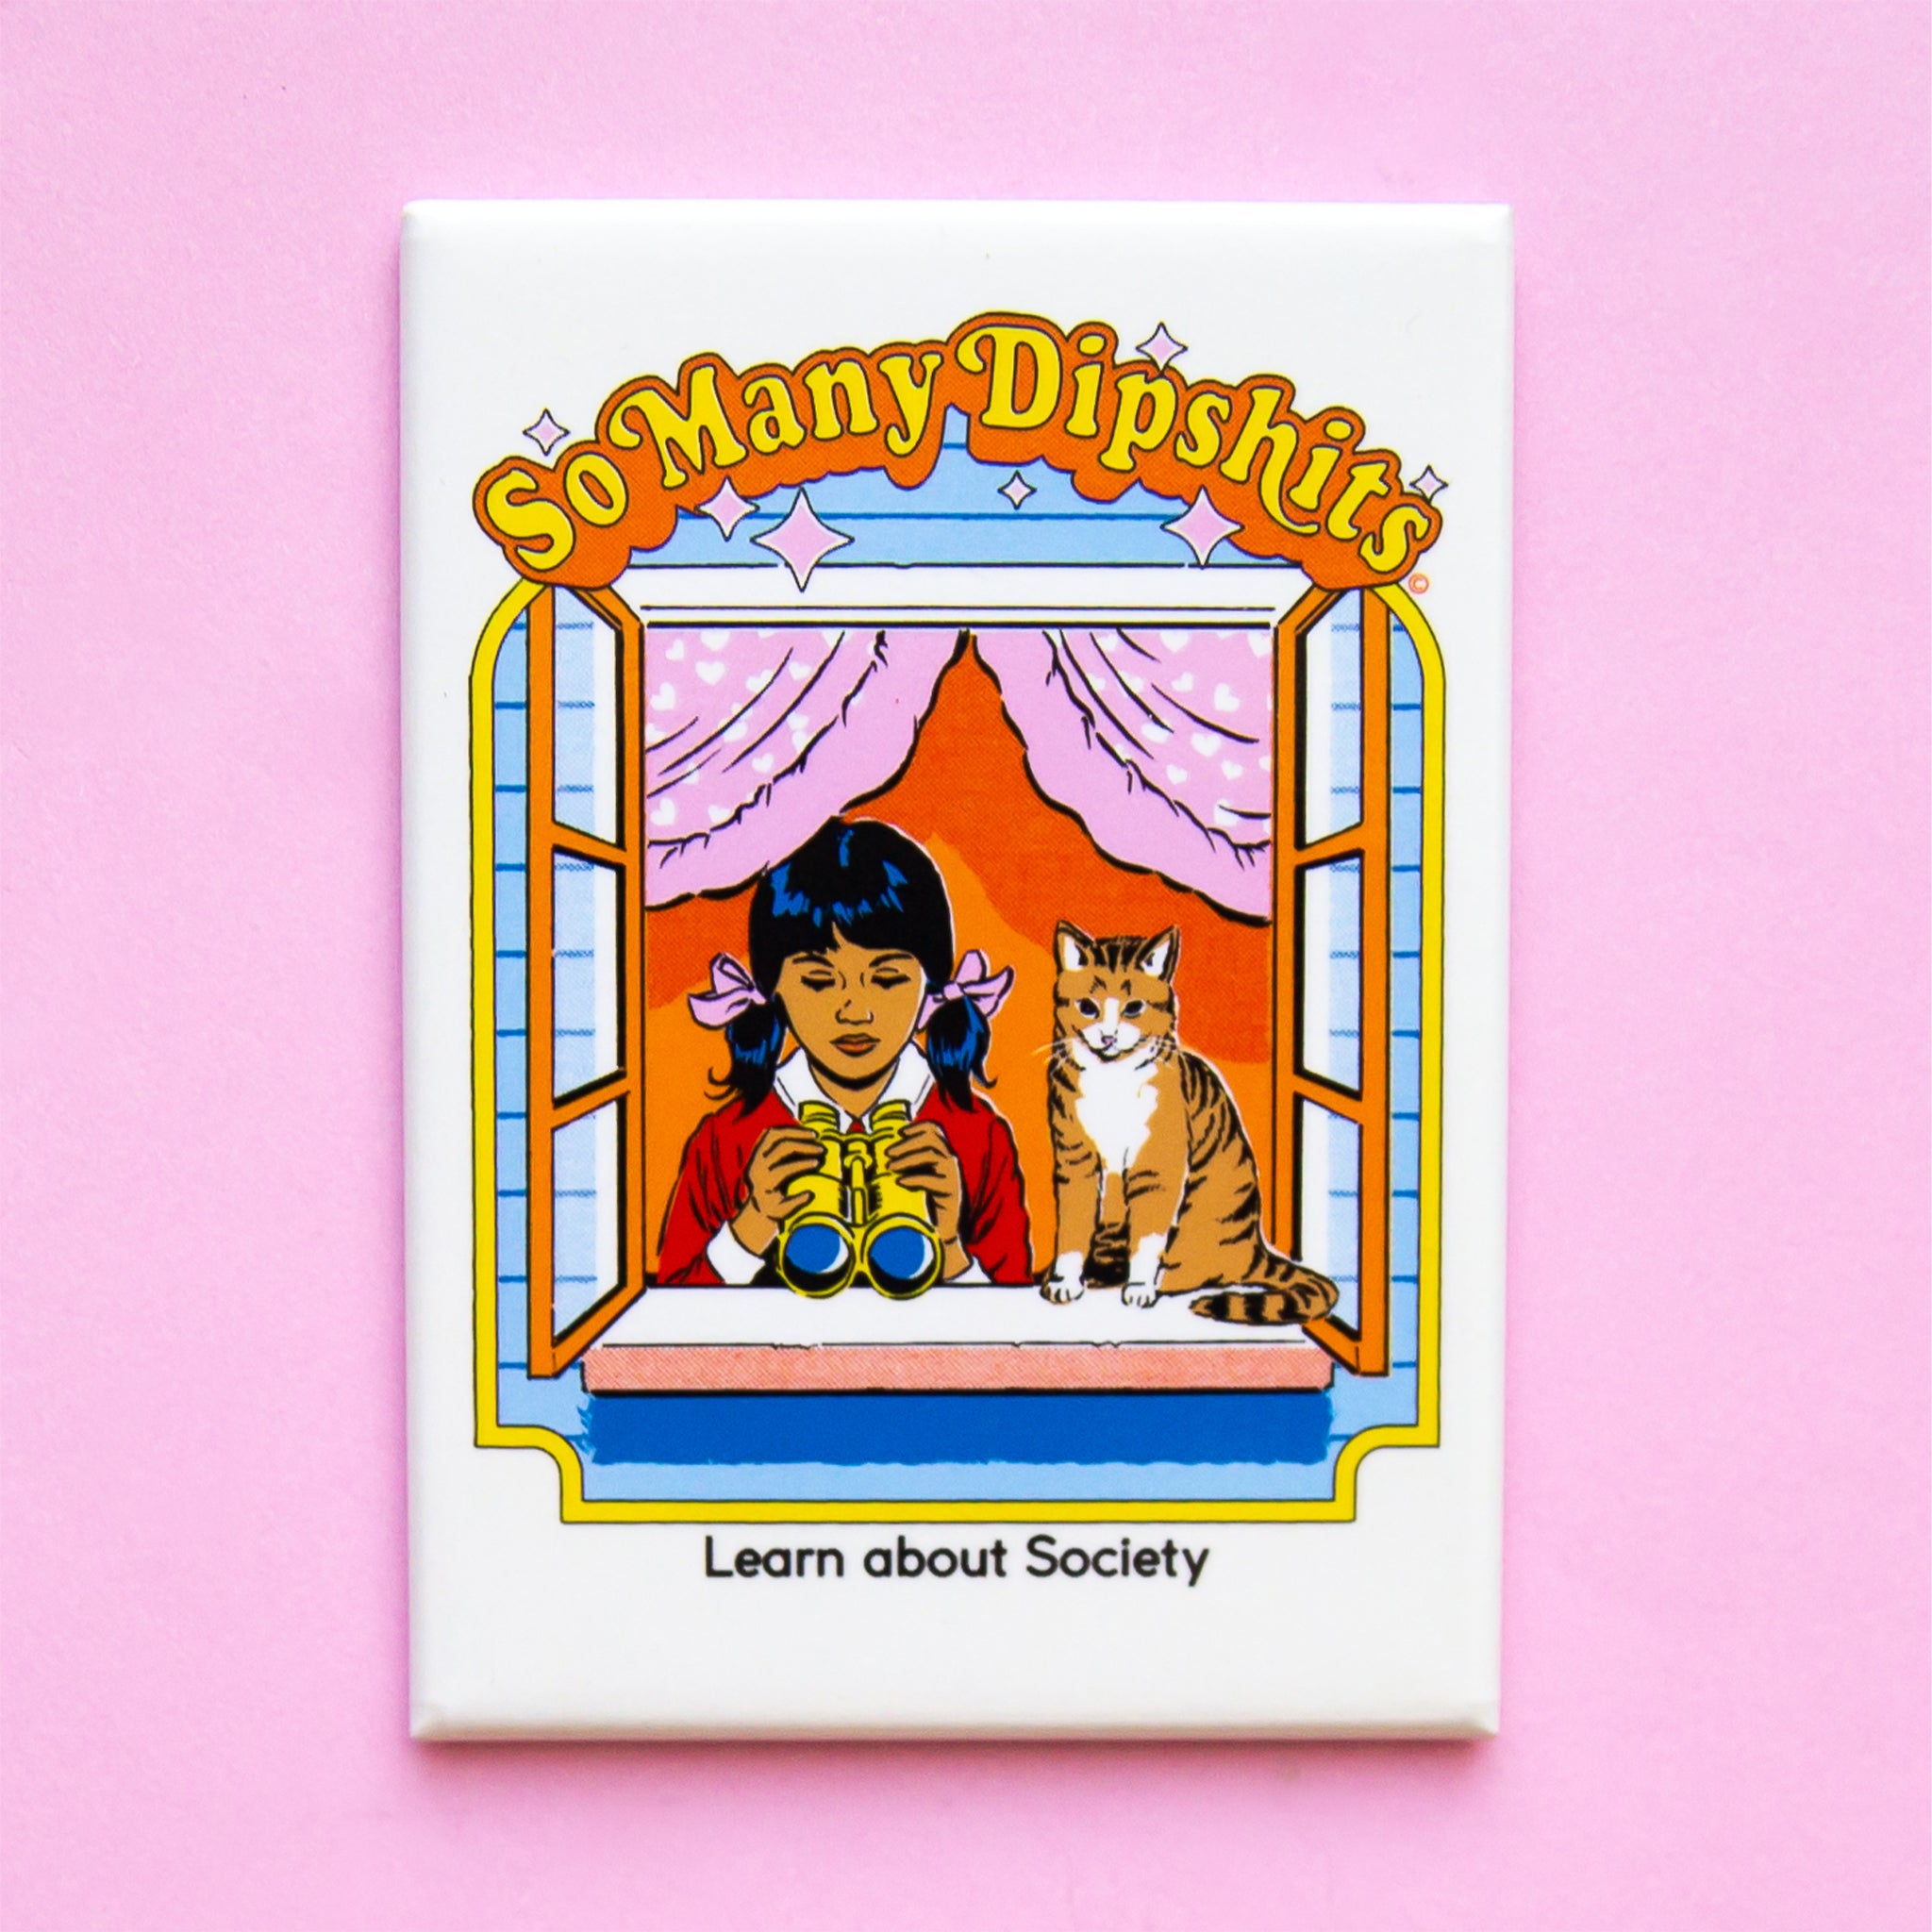 On a pink background is a rectangular magnet with an illustration of a little girl and her orange cat looking out the window with binoculars and text that reads, "So many dipshits Learn about society".